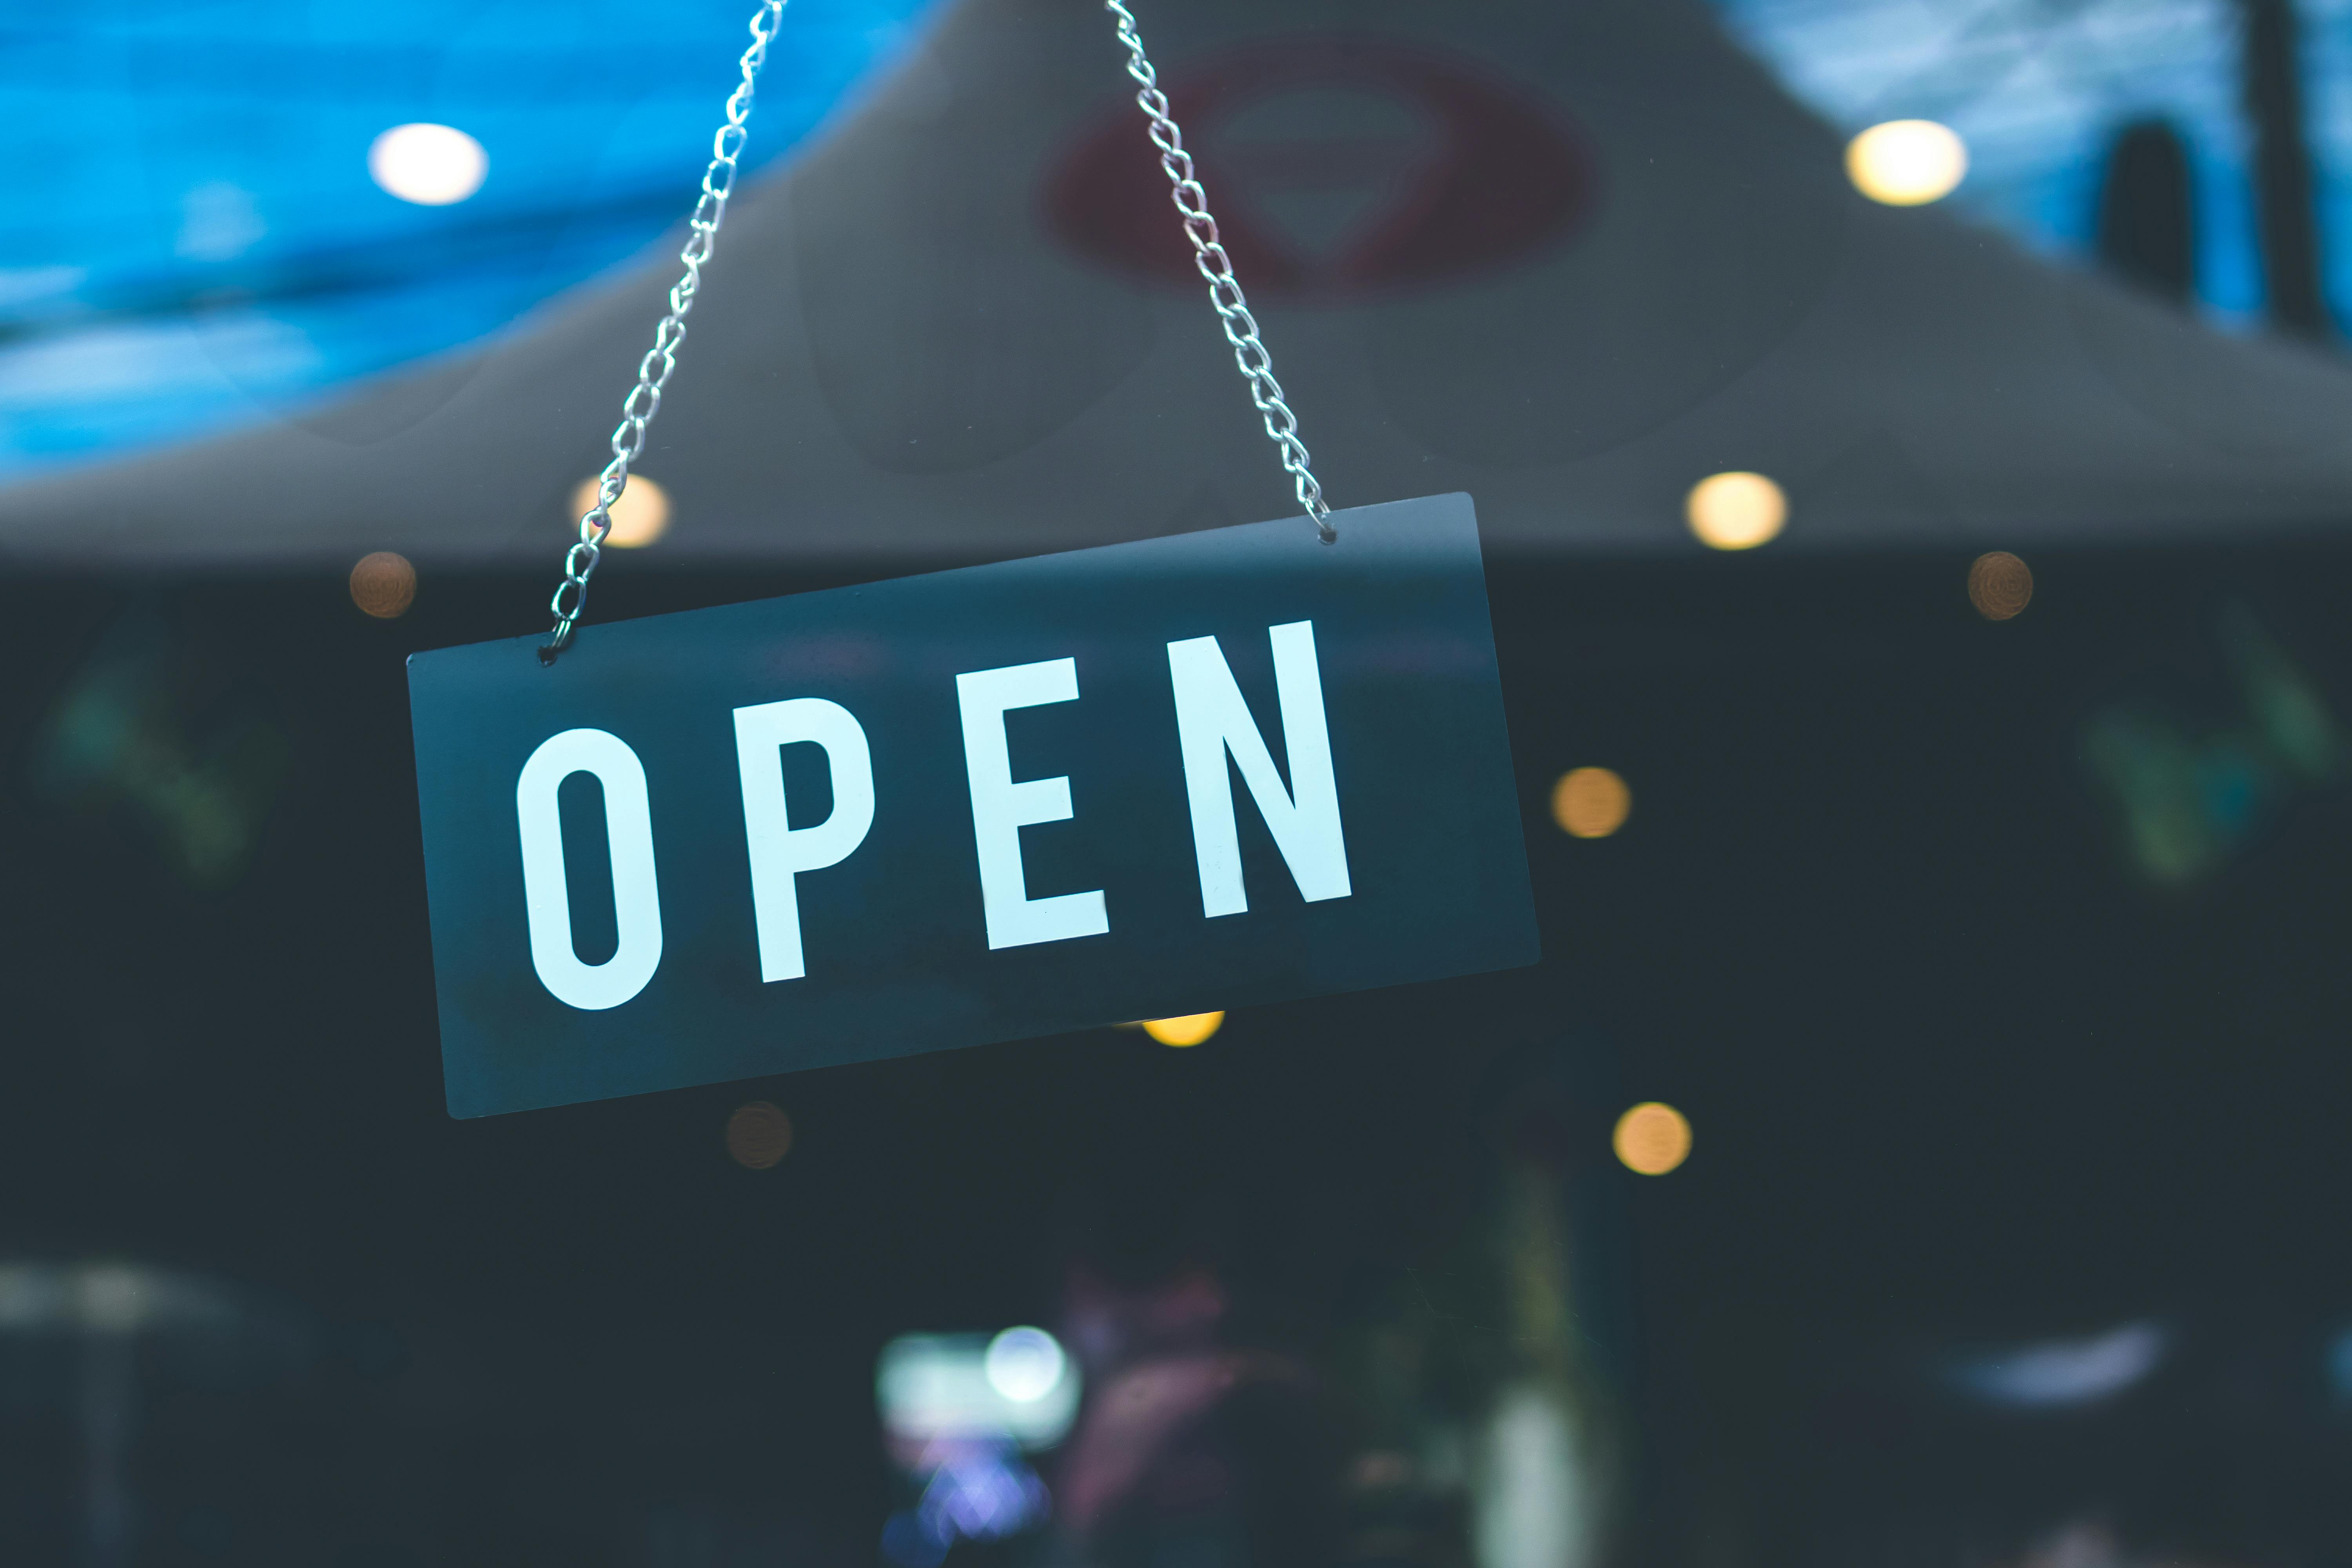 An open signage | Photo: Pexels